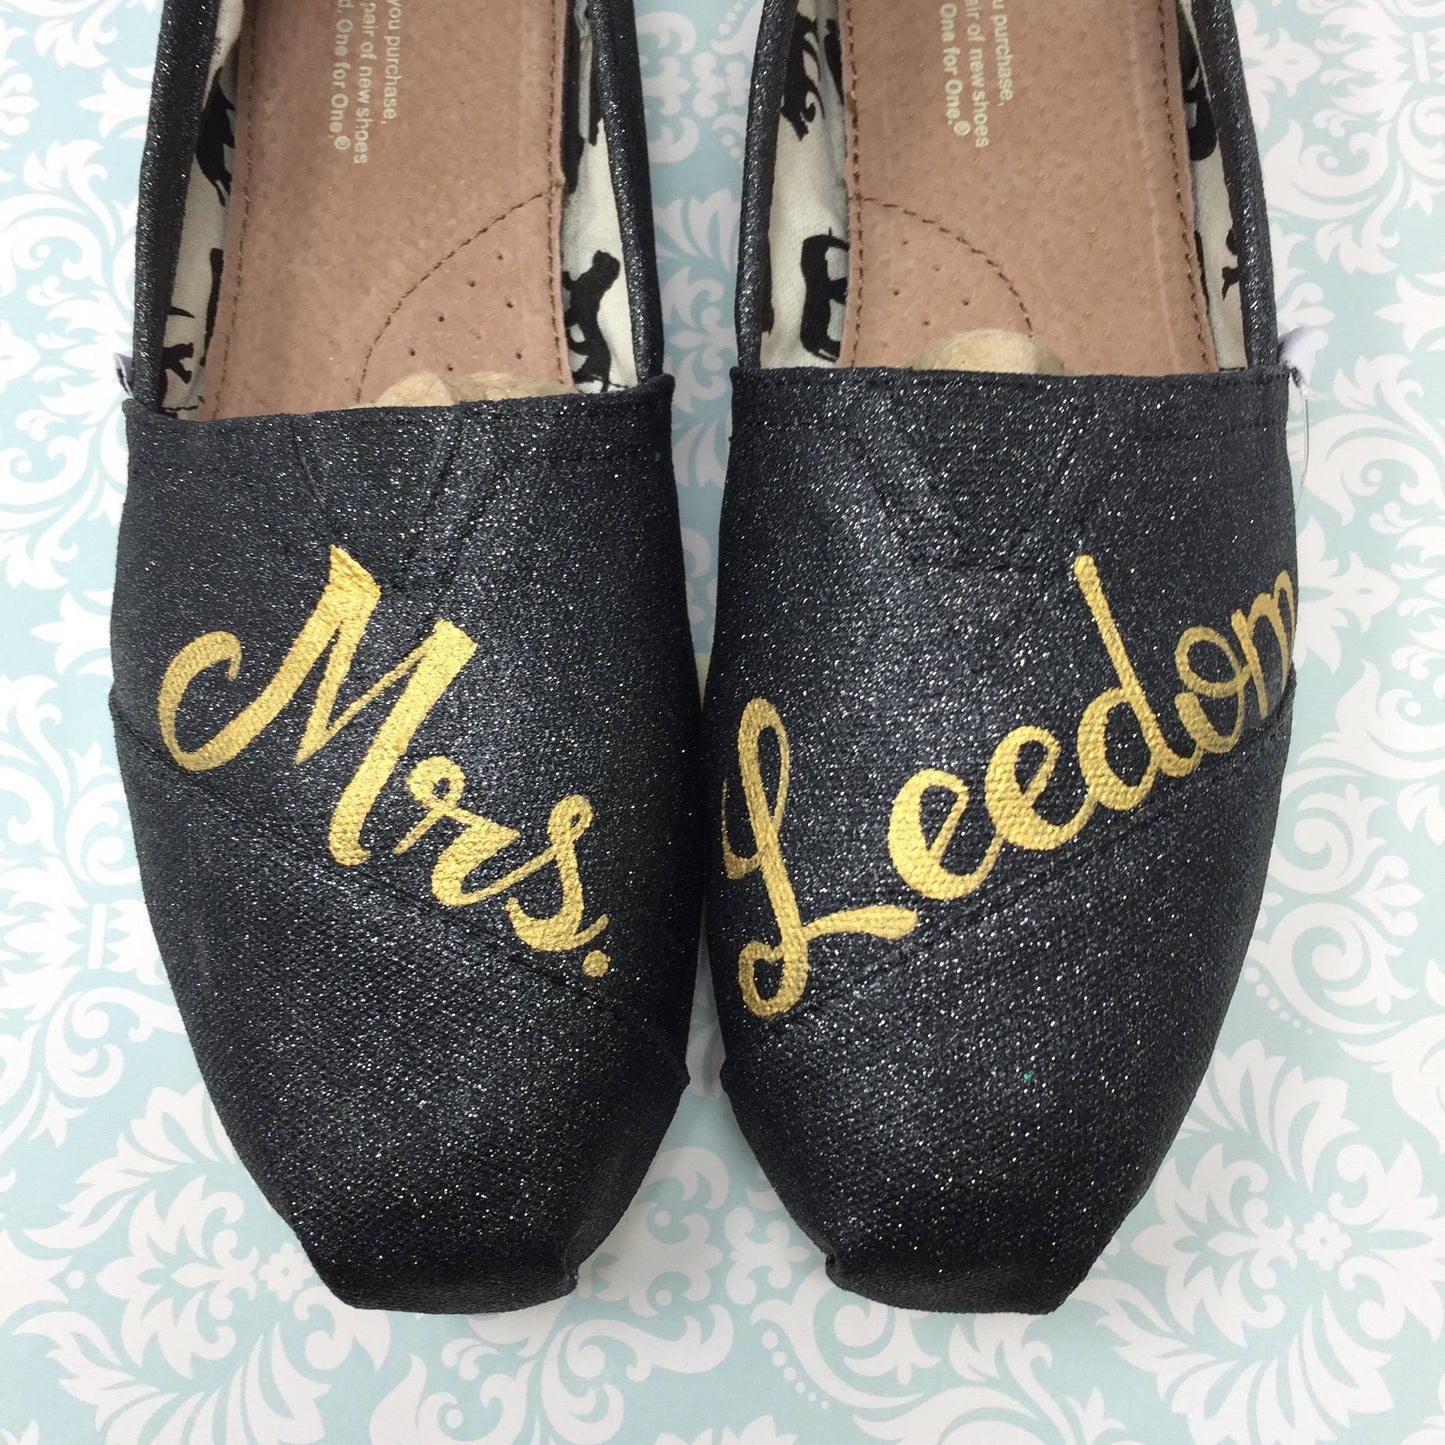 black glitter wedding toms with Mrs painted in gold. light blue paisley patterned background